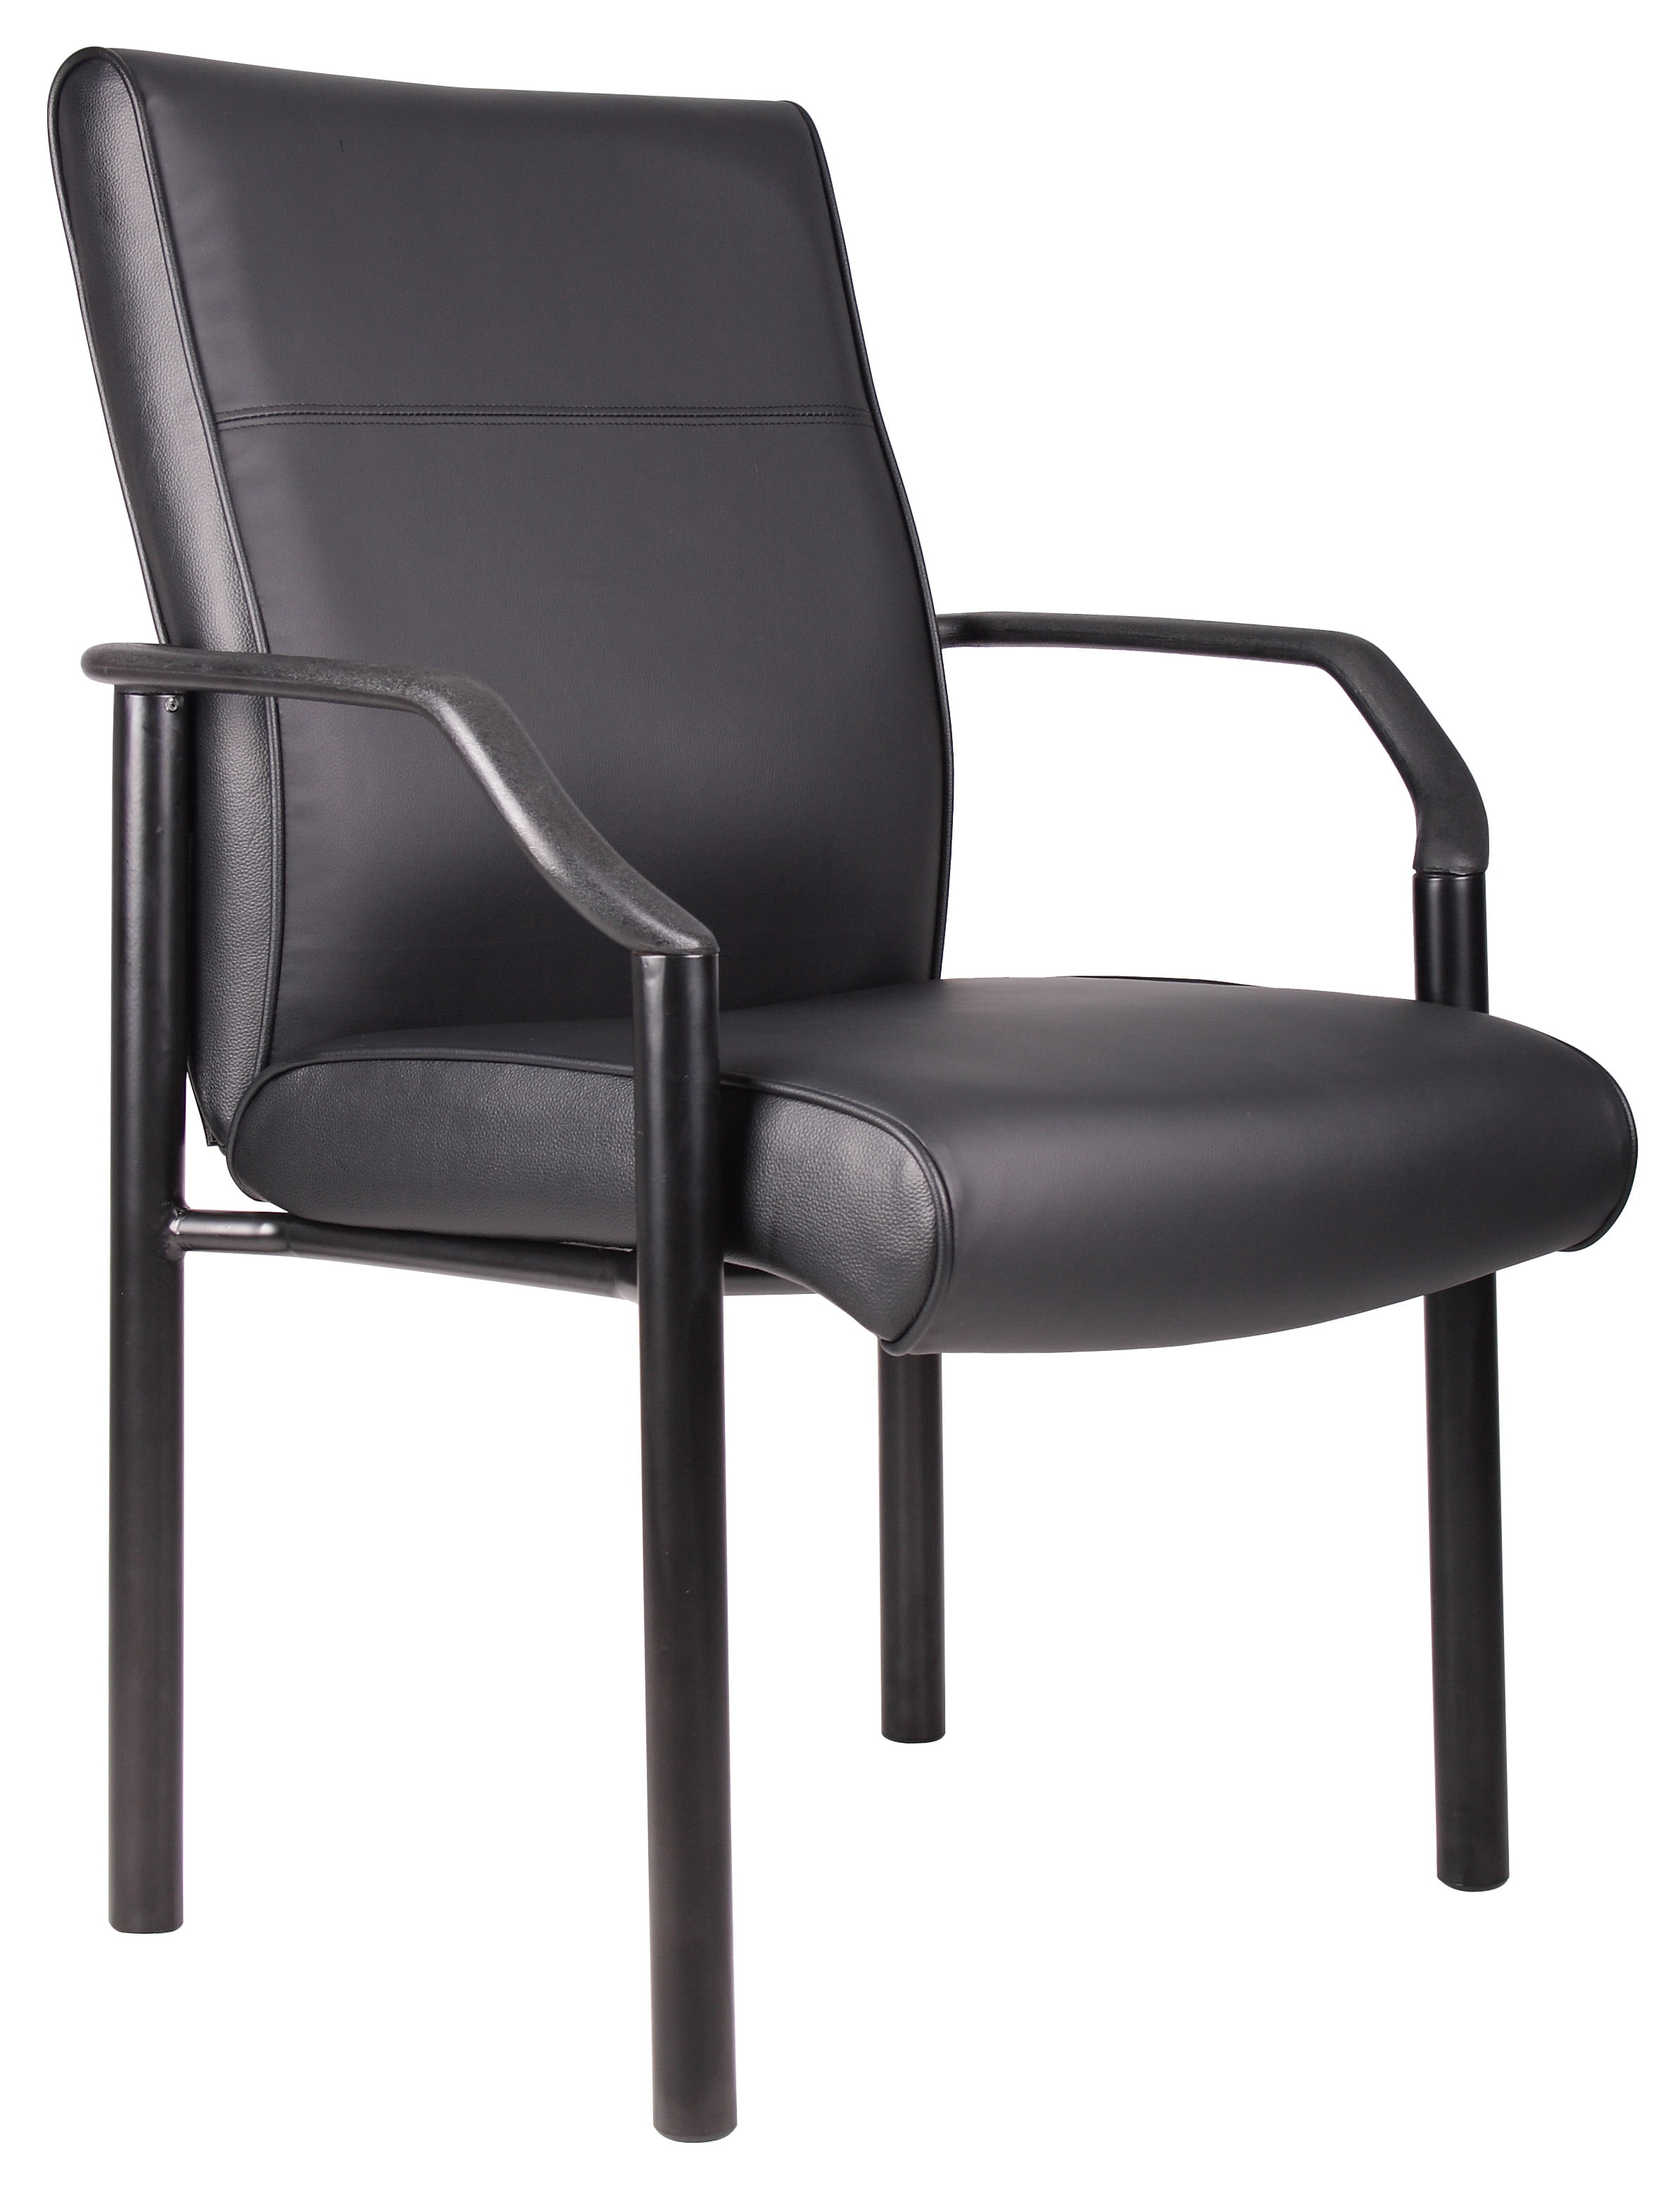 Boss Office Products Black Guest Reception Waiting Room Chair - Walmart.com